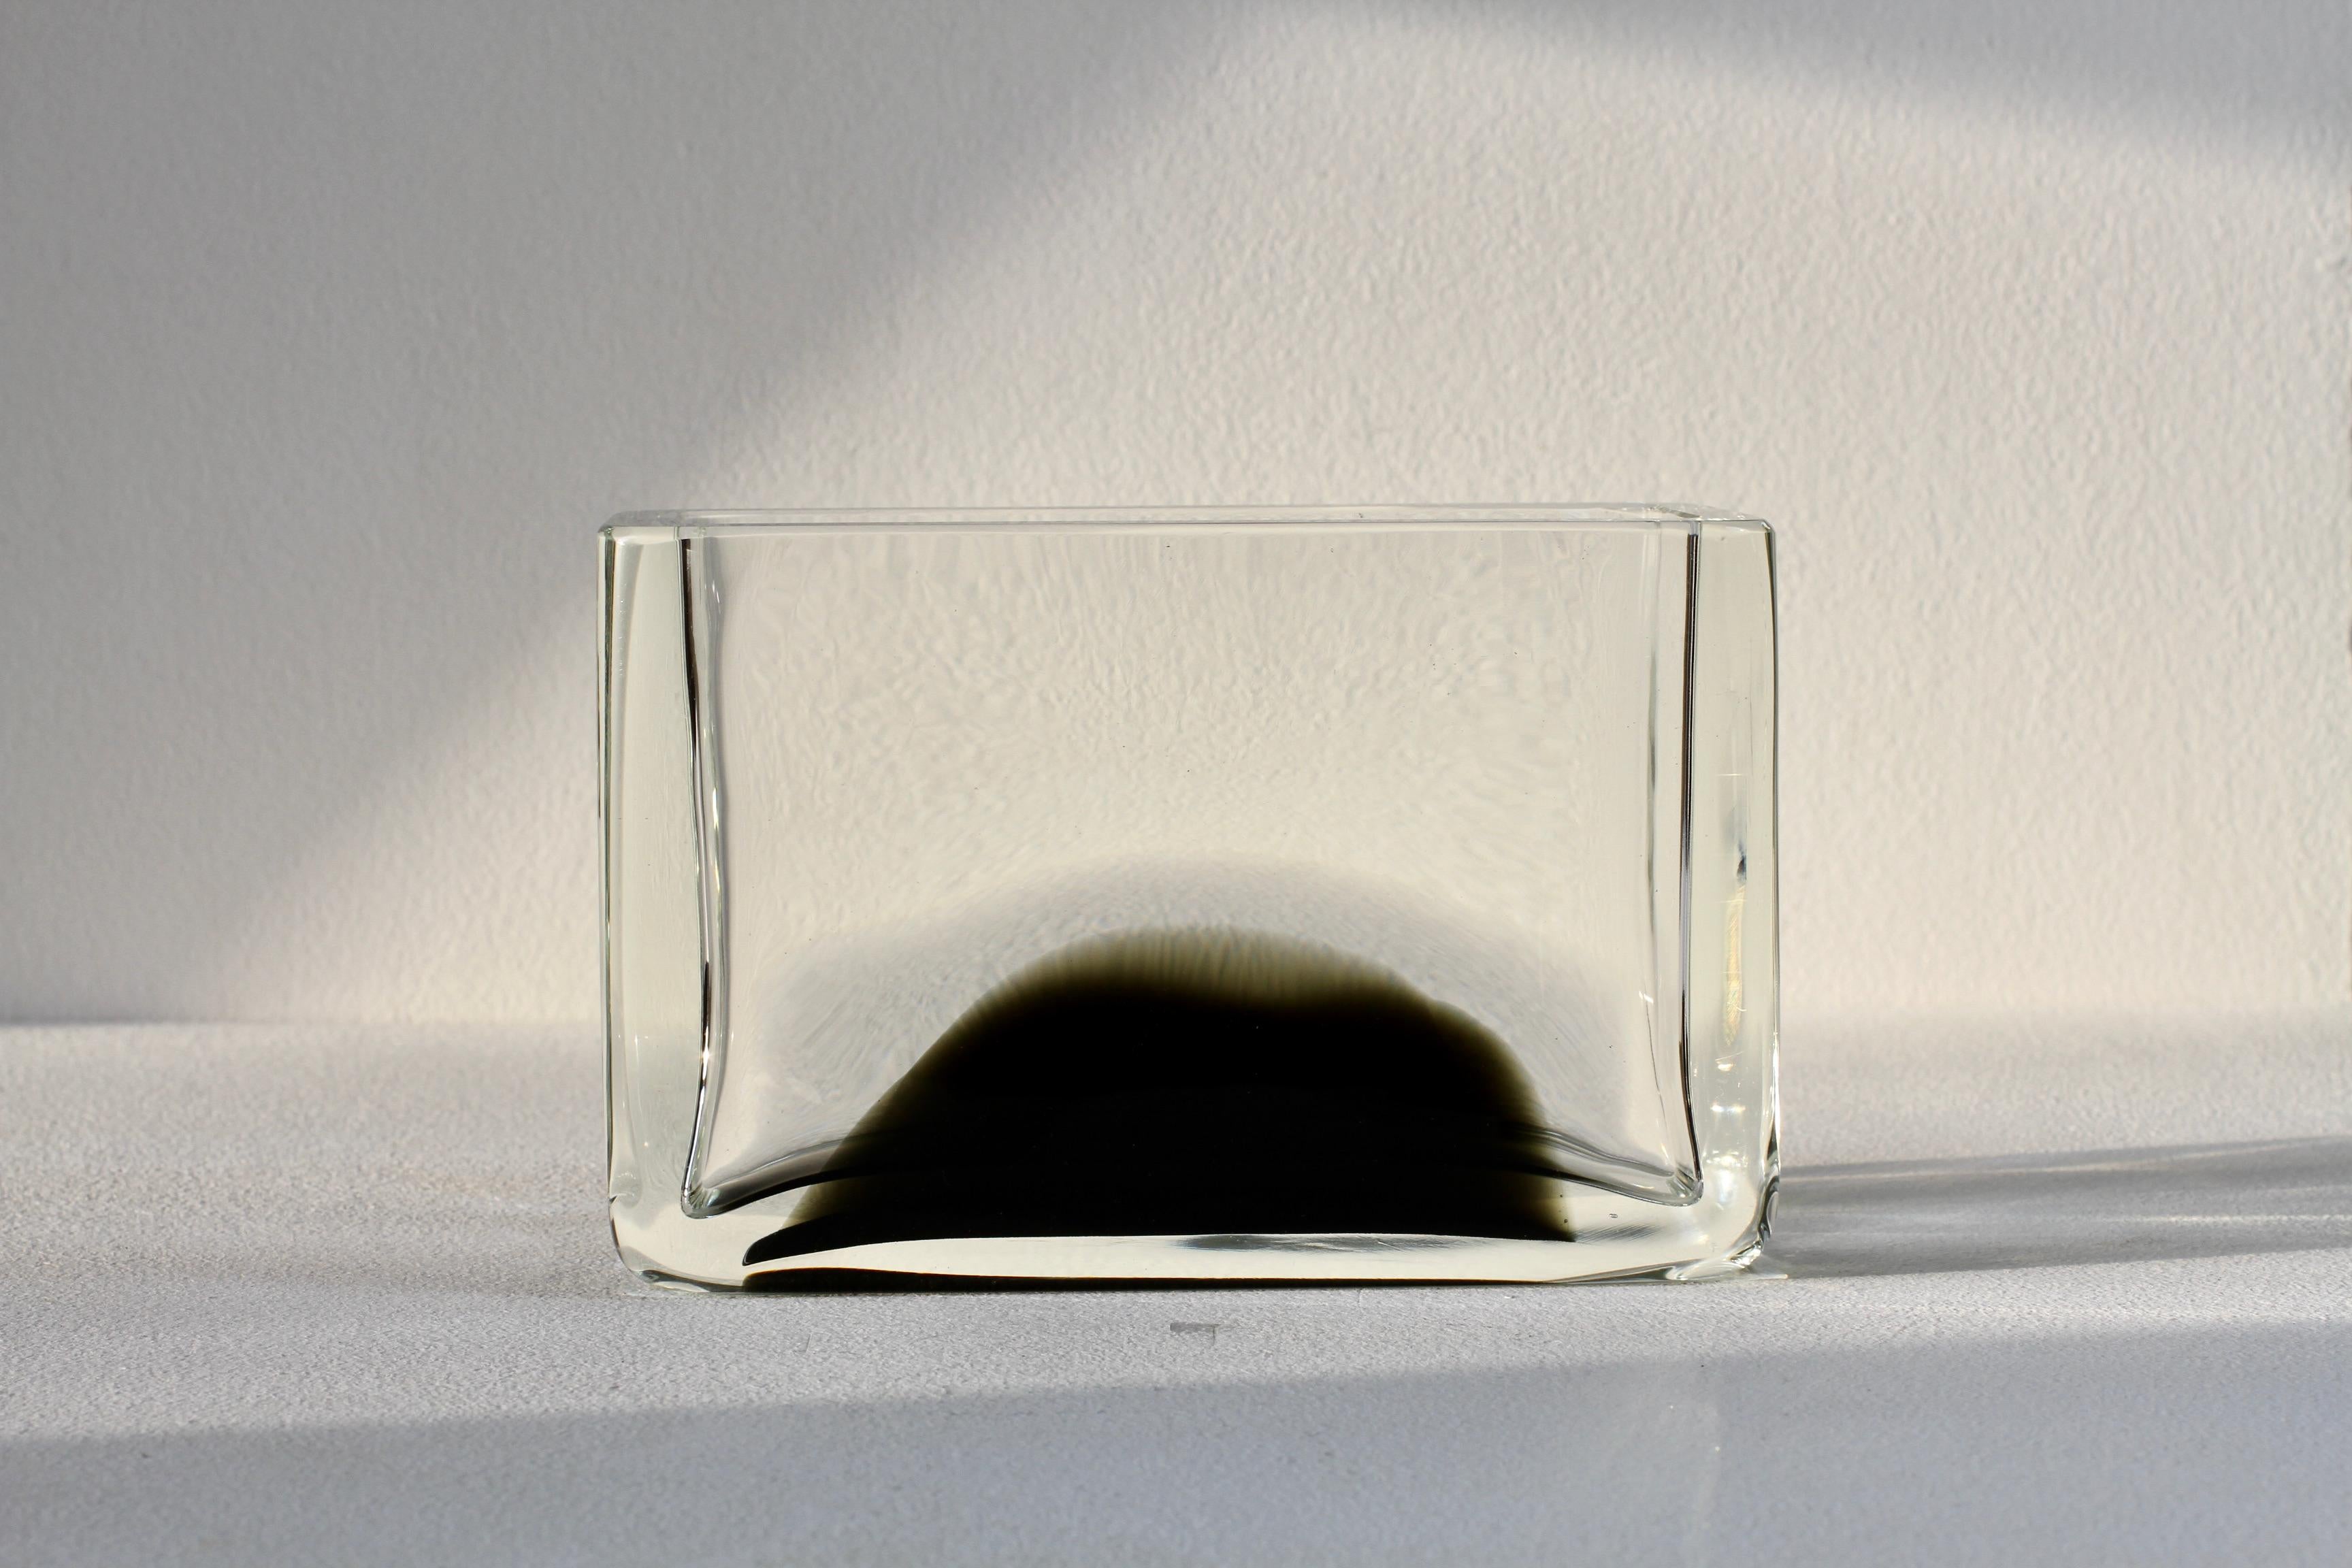 Antonio da Ros for Cenedese large, heavy and elegant vintage Mid-Century modern Italian Murano large, rectangular and wide glass vase, circa 1965-1975. This rare, large and heavy piece of glass features a simplistic, elegant form and design in thick